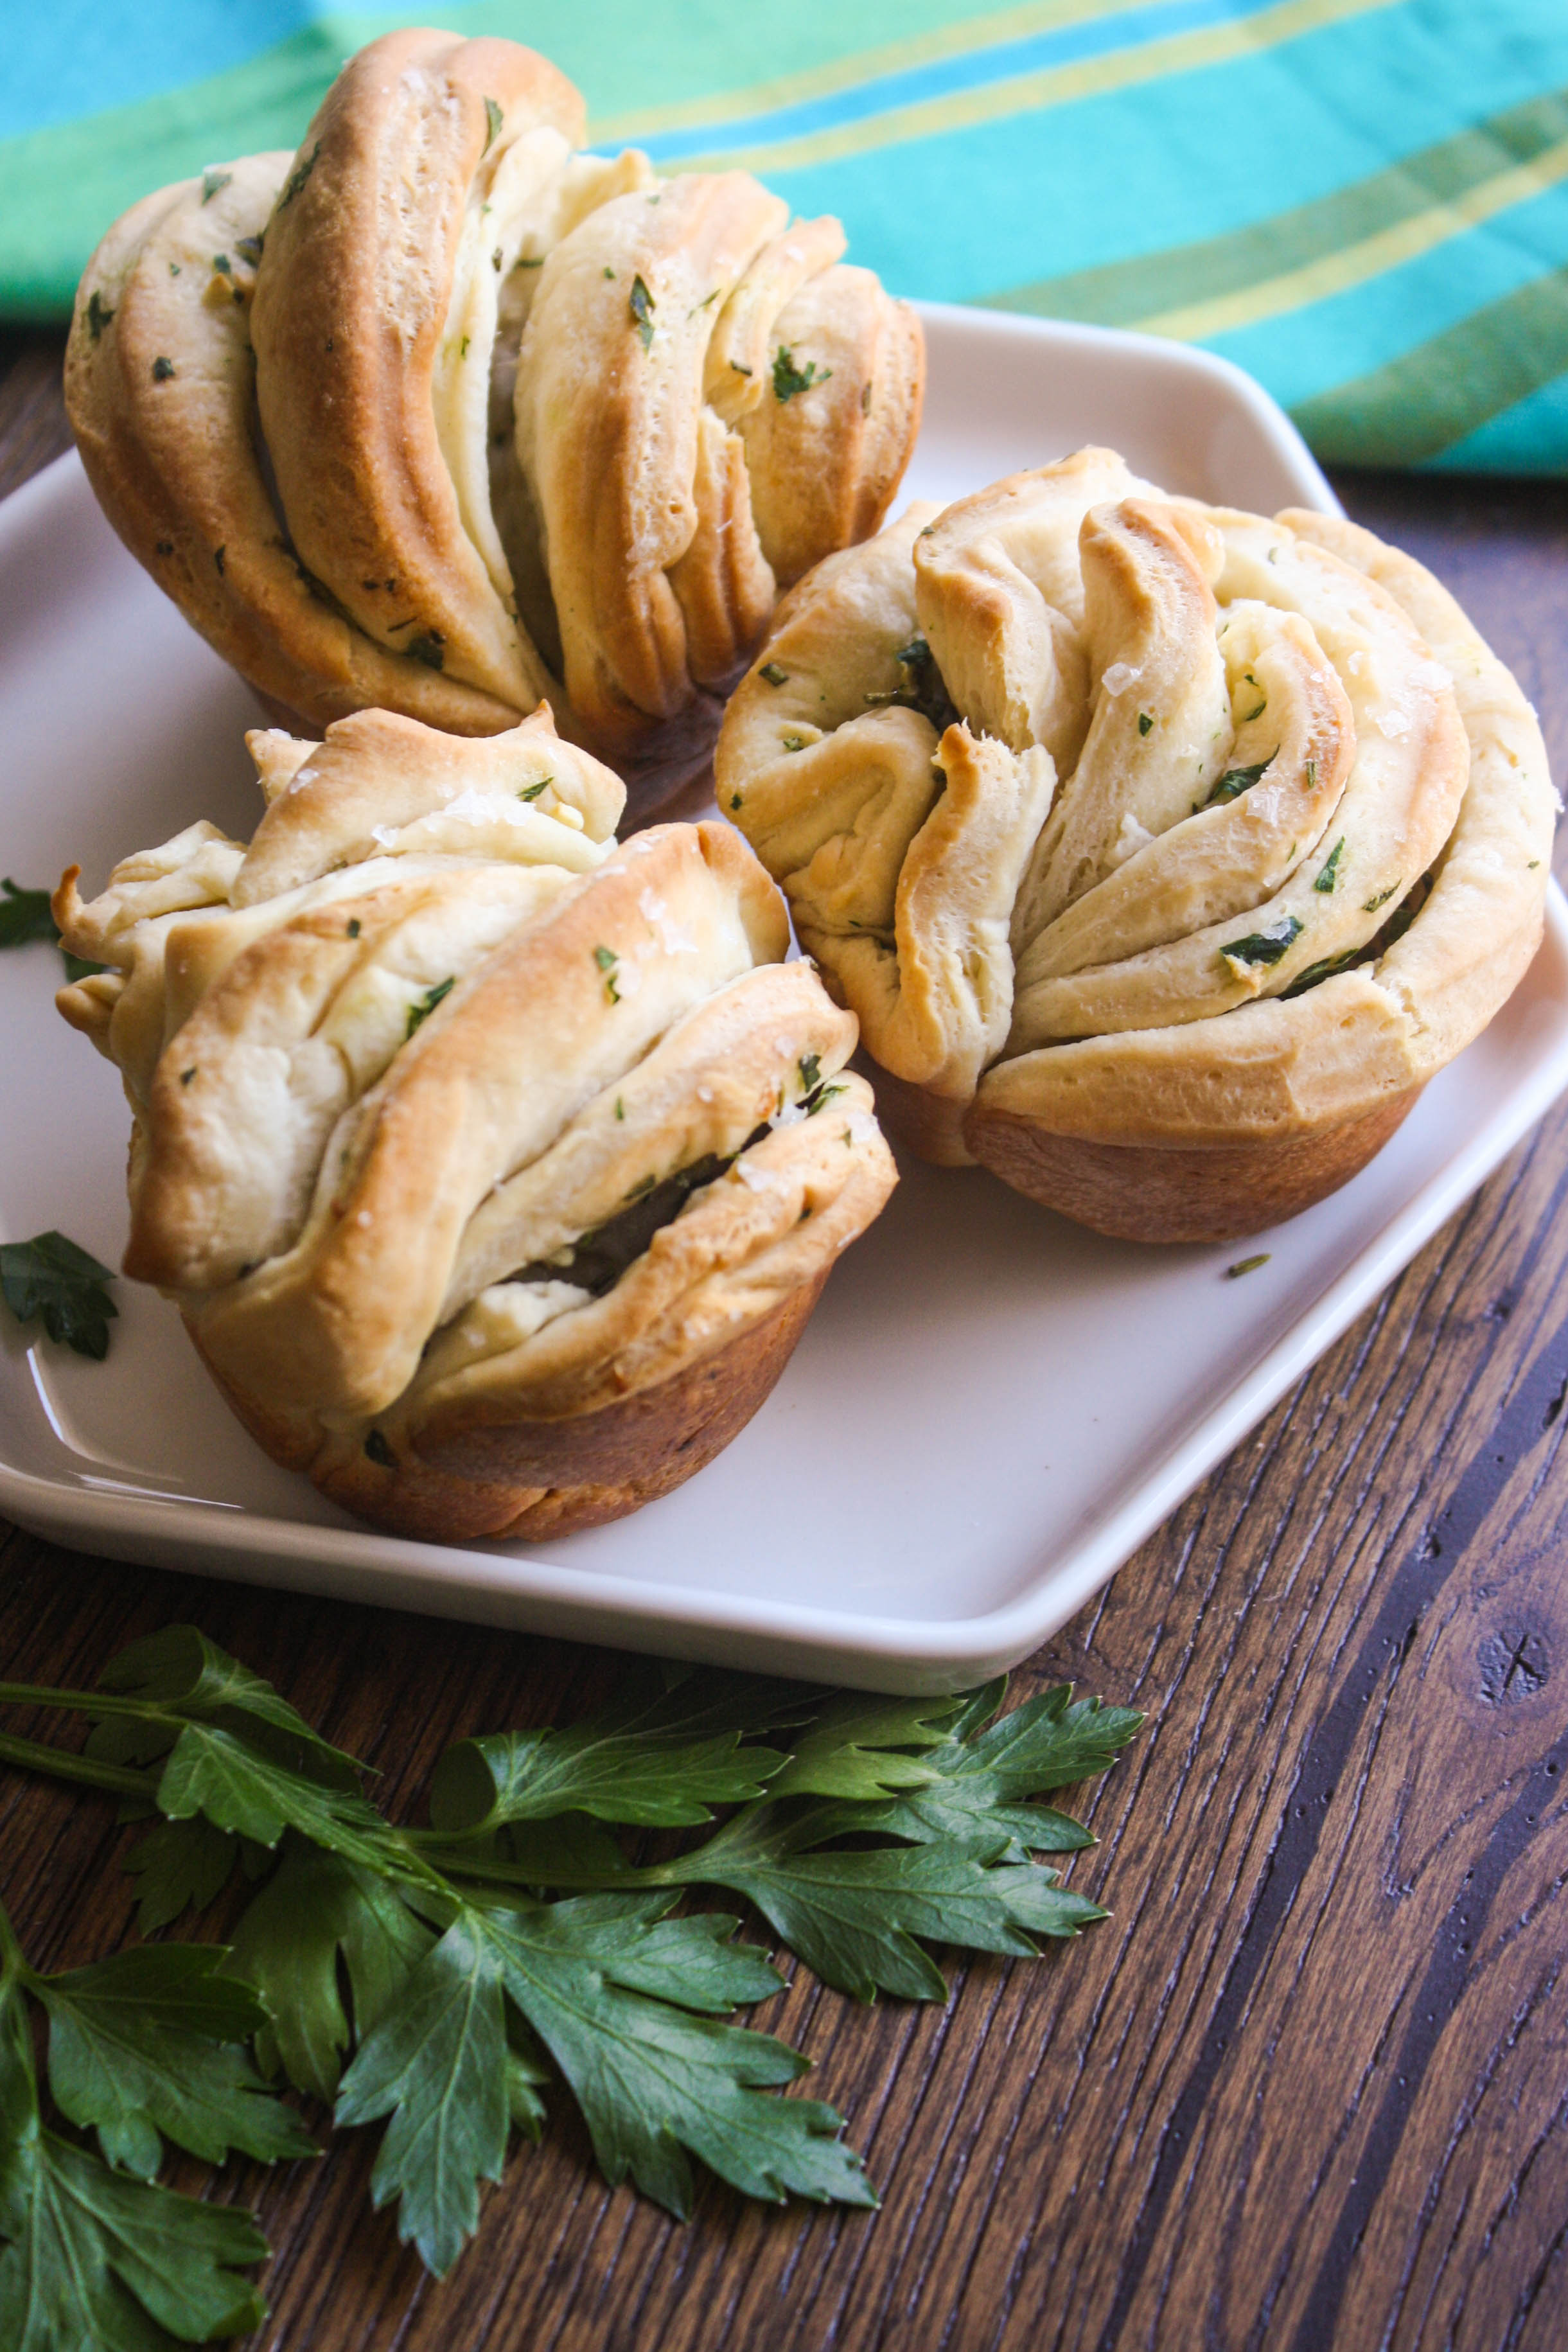 Garlic & Herb Pull Apart Bread is a fun treat for everyone. You'll love how pretty it is to serve!